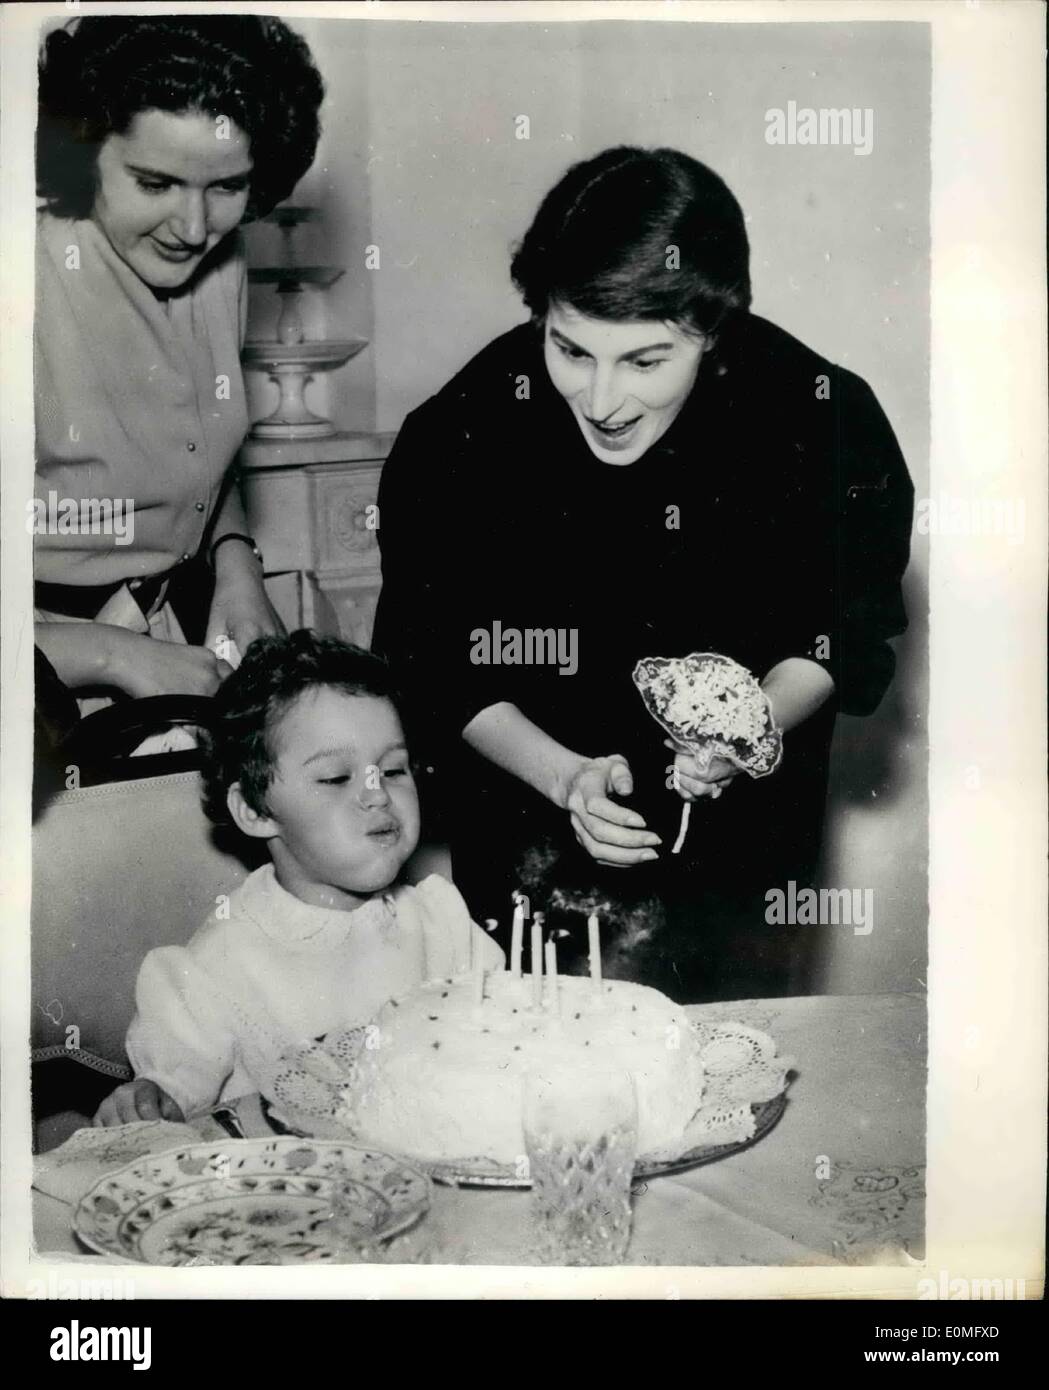 Jan. 01, 1955 - Silvana Mangano gives birthday party for her eldest daughter; Silvana Mangano, the Italian film star, who is expecting a baby in February, gave a birthday party to her eldest daughter, Veronica, on her fifth birthday, at her home in Rome. The party was gay affair Veronica and her three year old sister Isabella, who invited their little friends. Silvana Mangano served all the children and helped Veronica to cut her birthday cake. Photo Shows Five year old Veronica, blows out the candles on her birthday cake watched by her celebrated mother and governess. Stock Photo